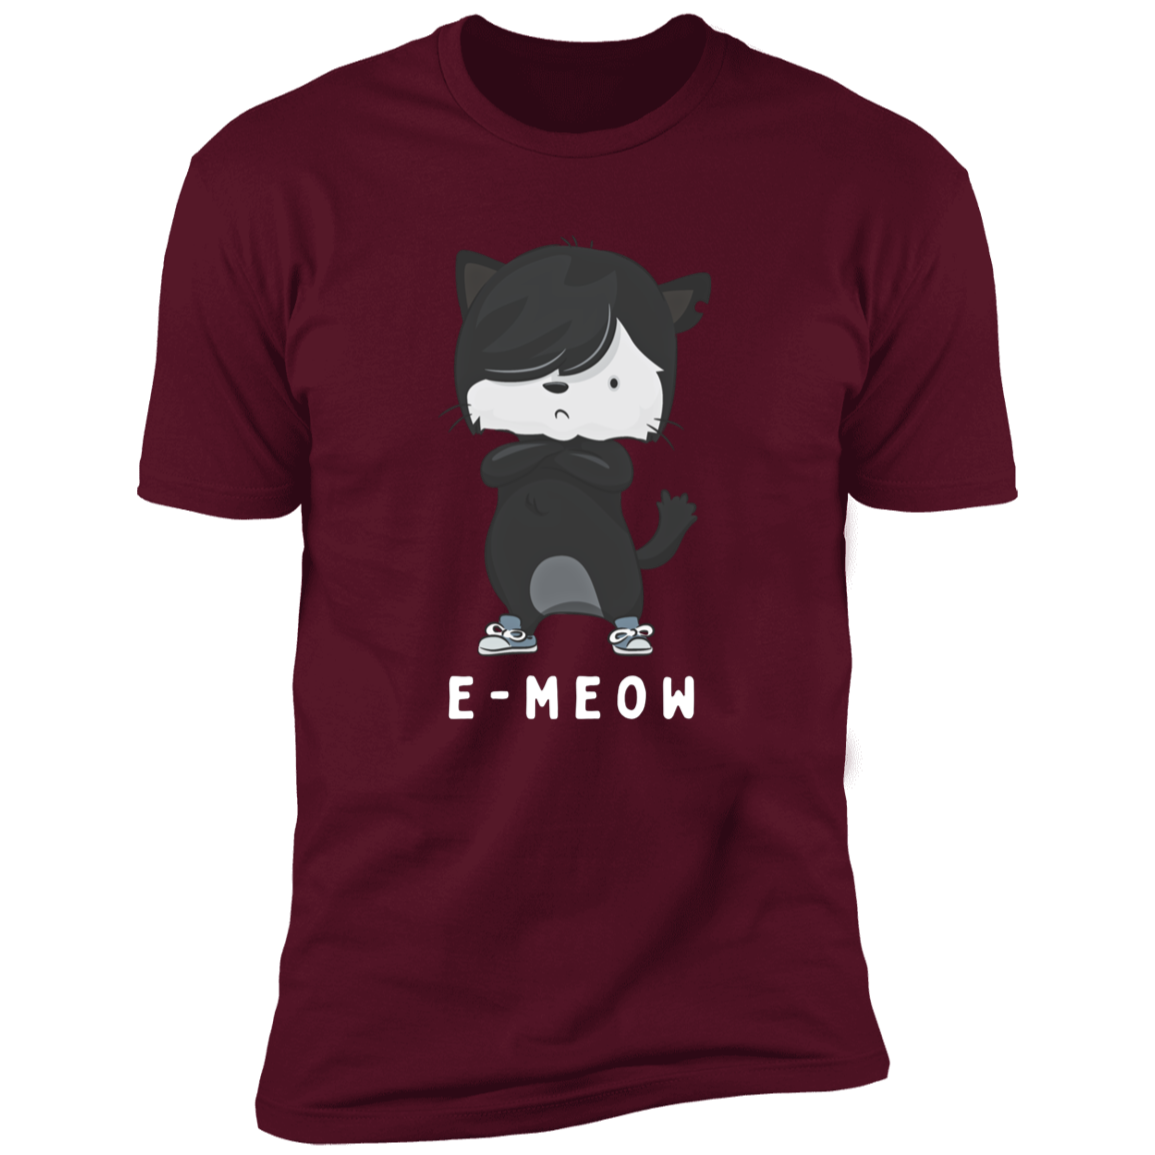 E-meow cat shirt, funny cat shirt for humans, cat mom and cat dad shirt, in maroon